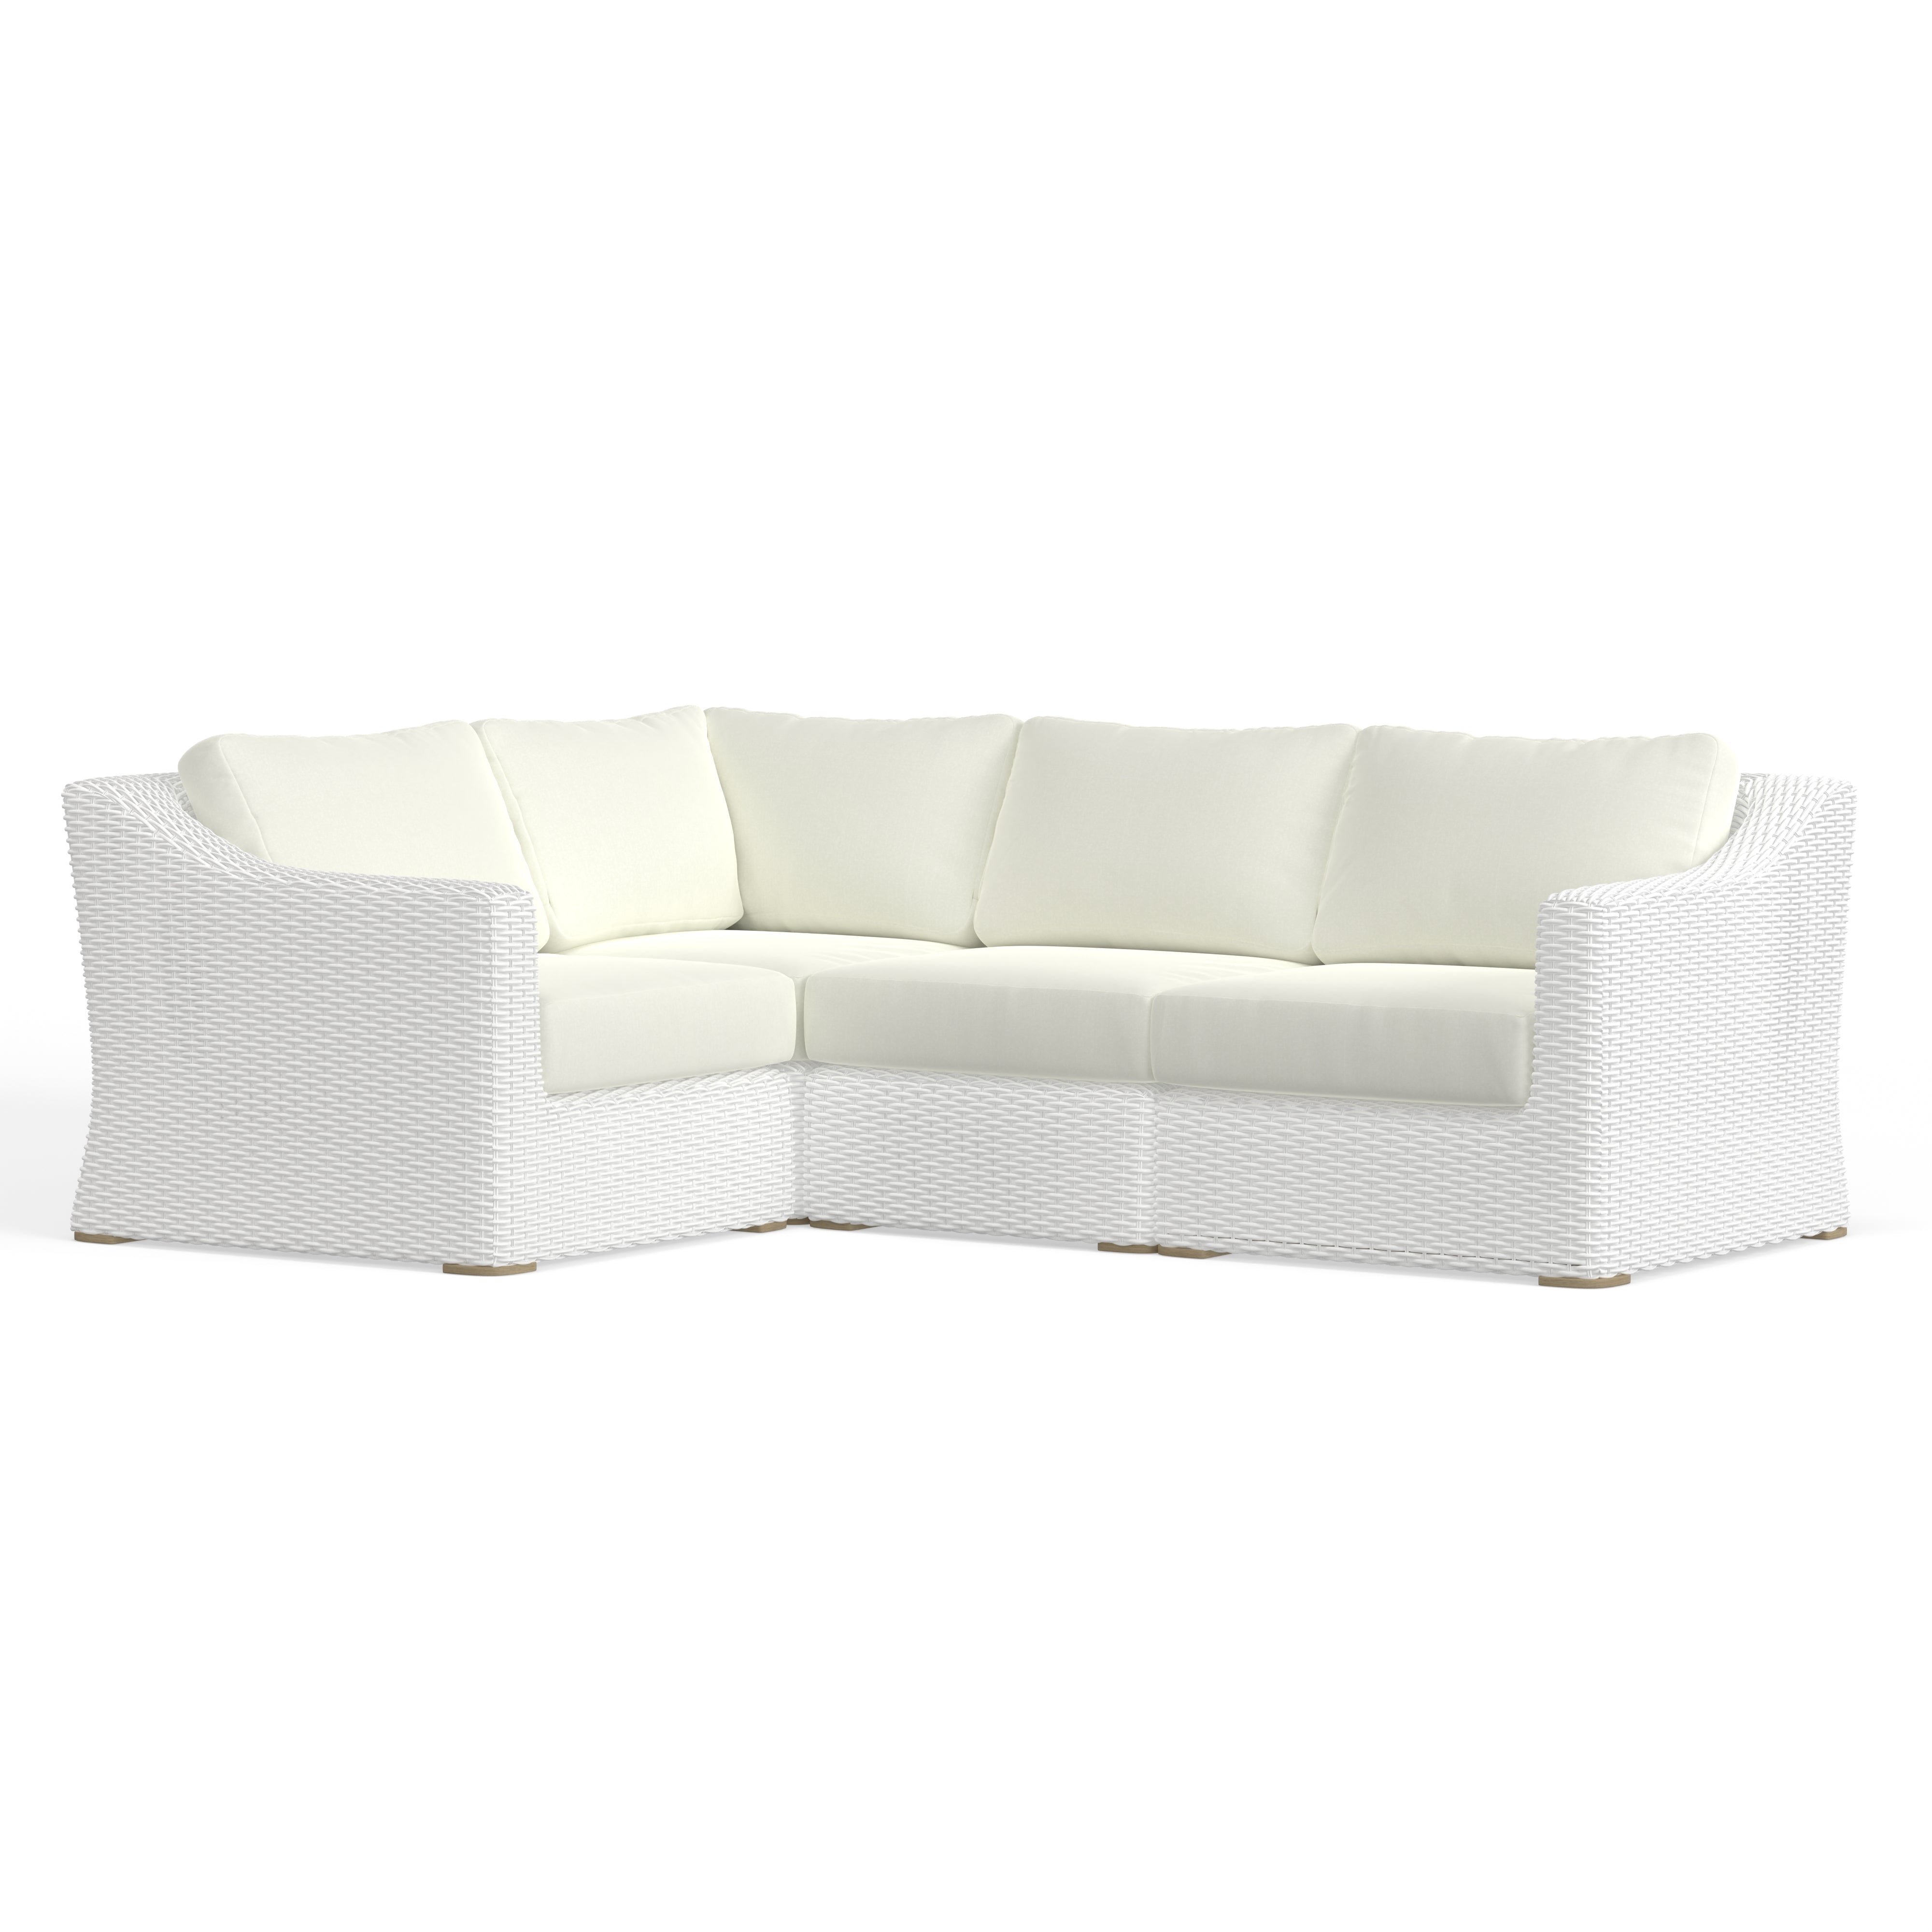 4 Seat Wicker Sectional